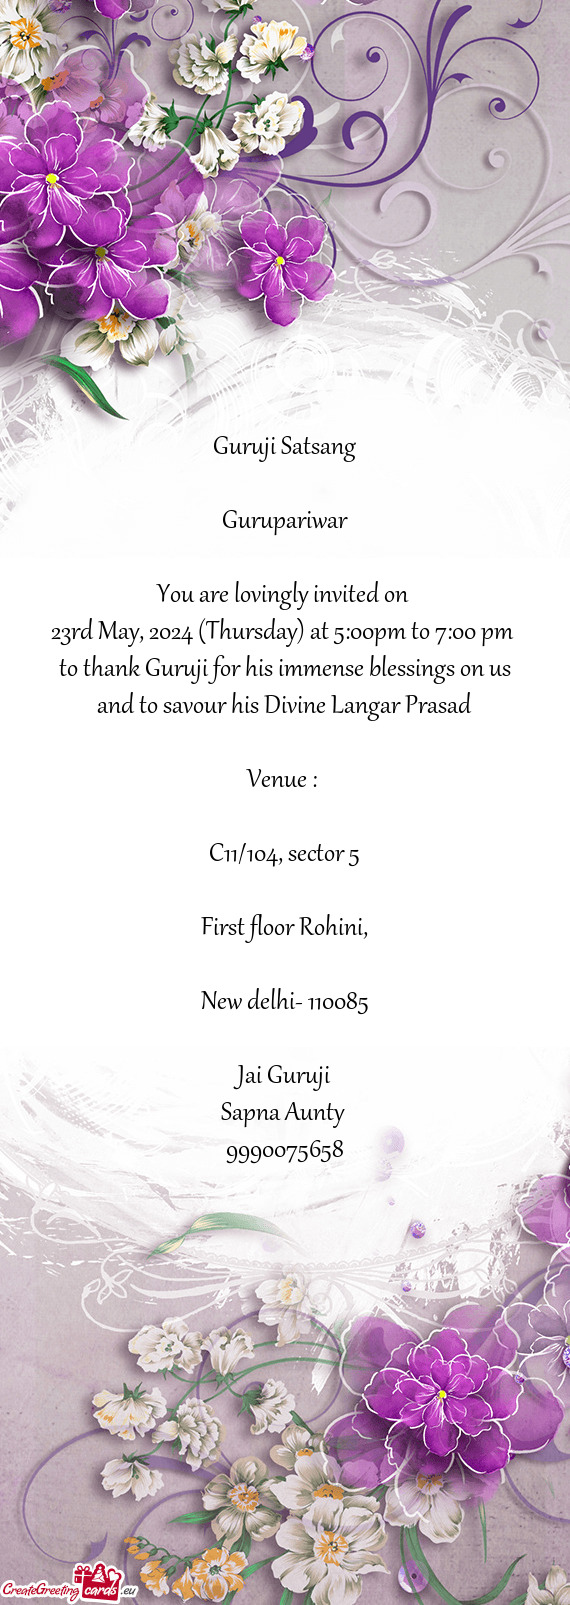 23rd May, 2024 (Thursday) at 5:00pm to 7:00 pm